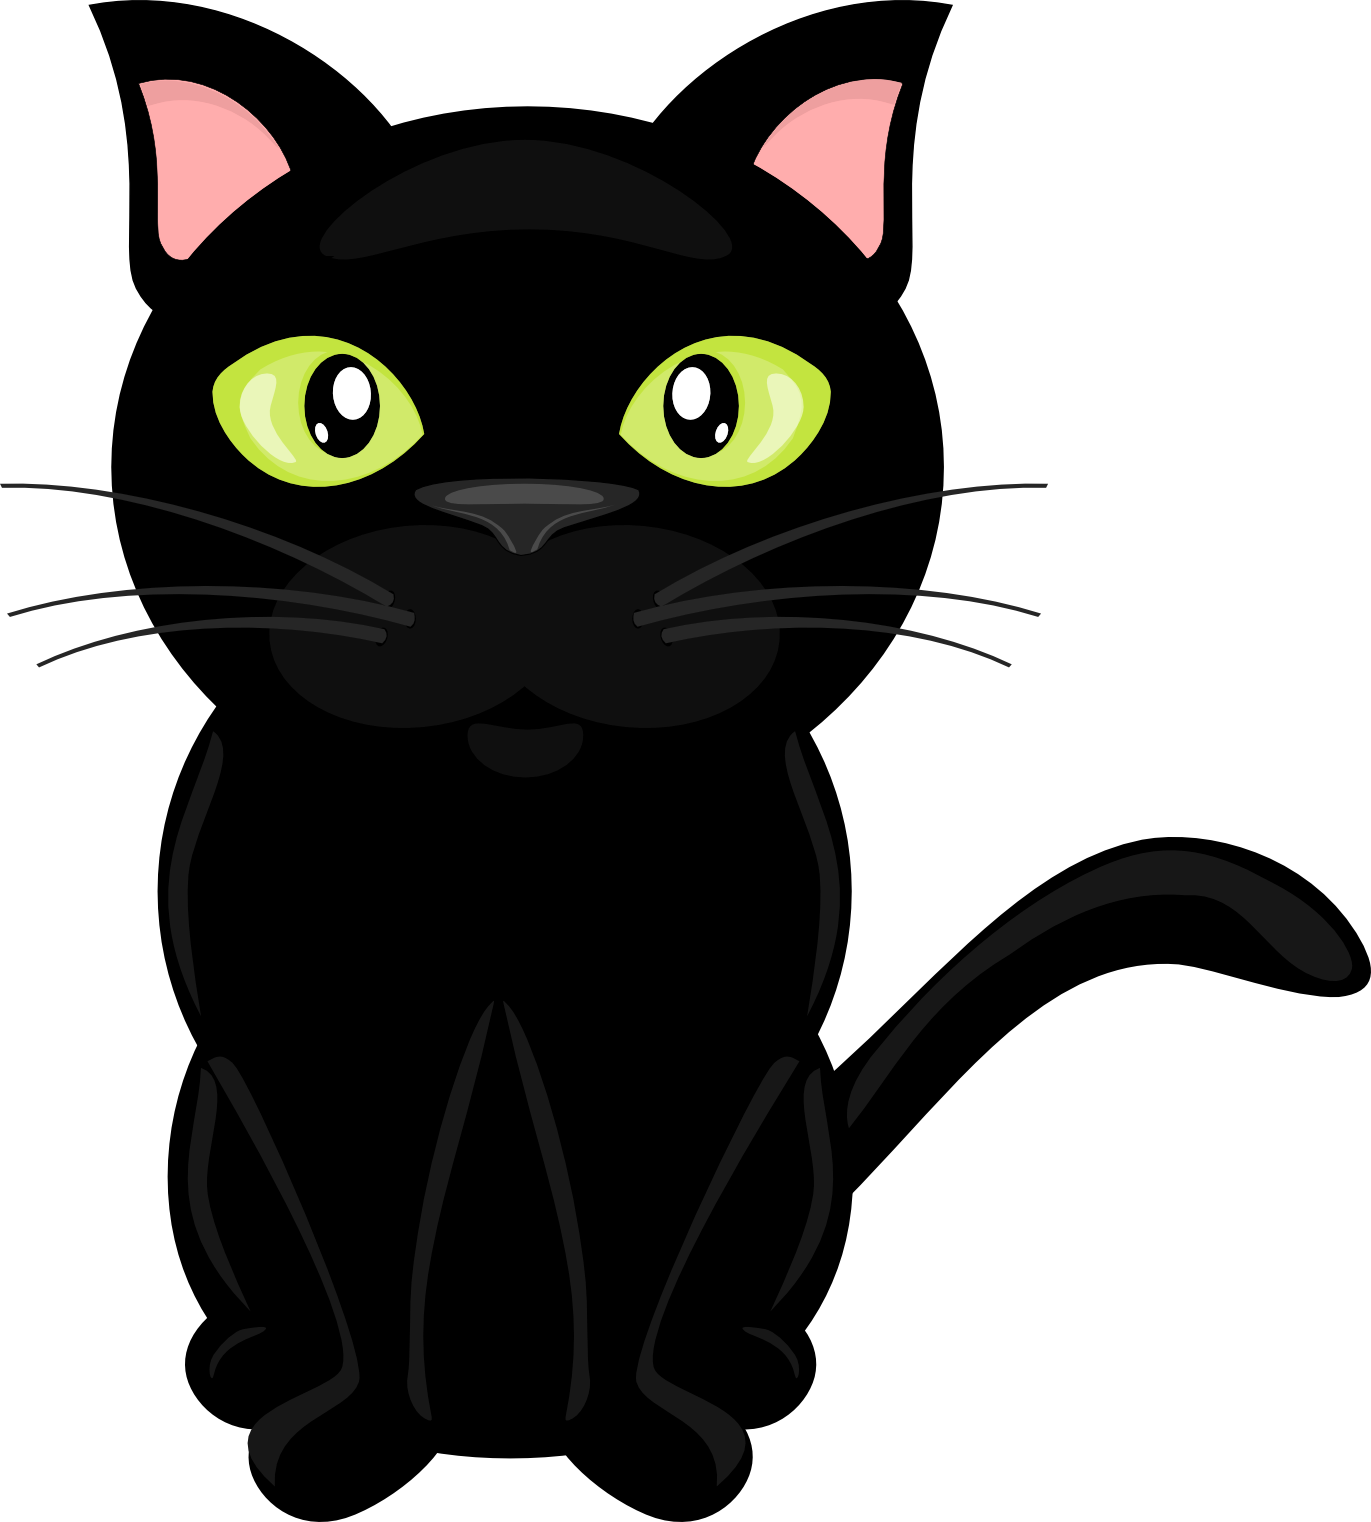 Tuxedo Cat Clipart | Free download on ClipArtMag